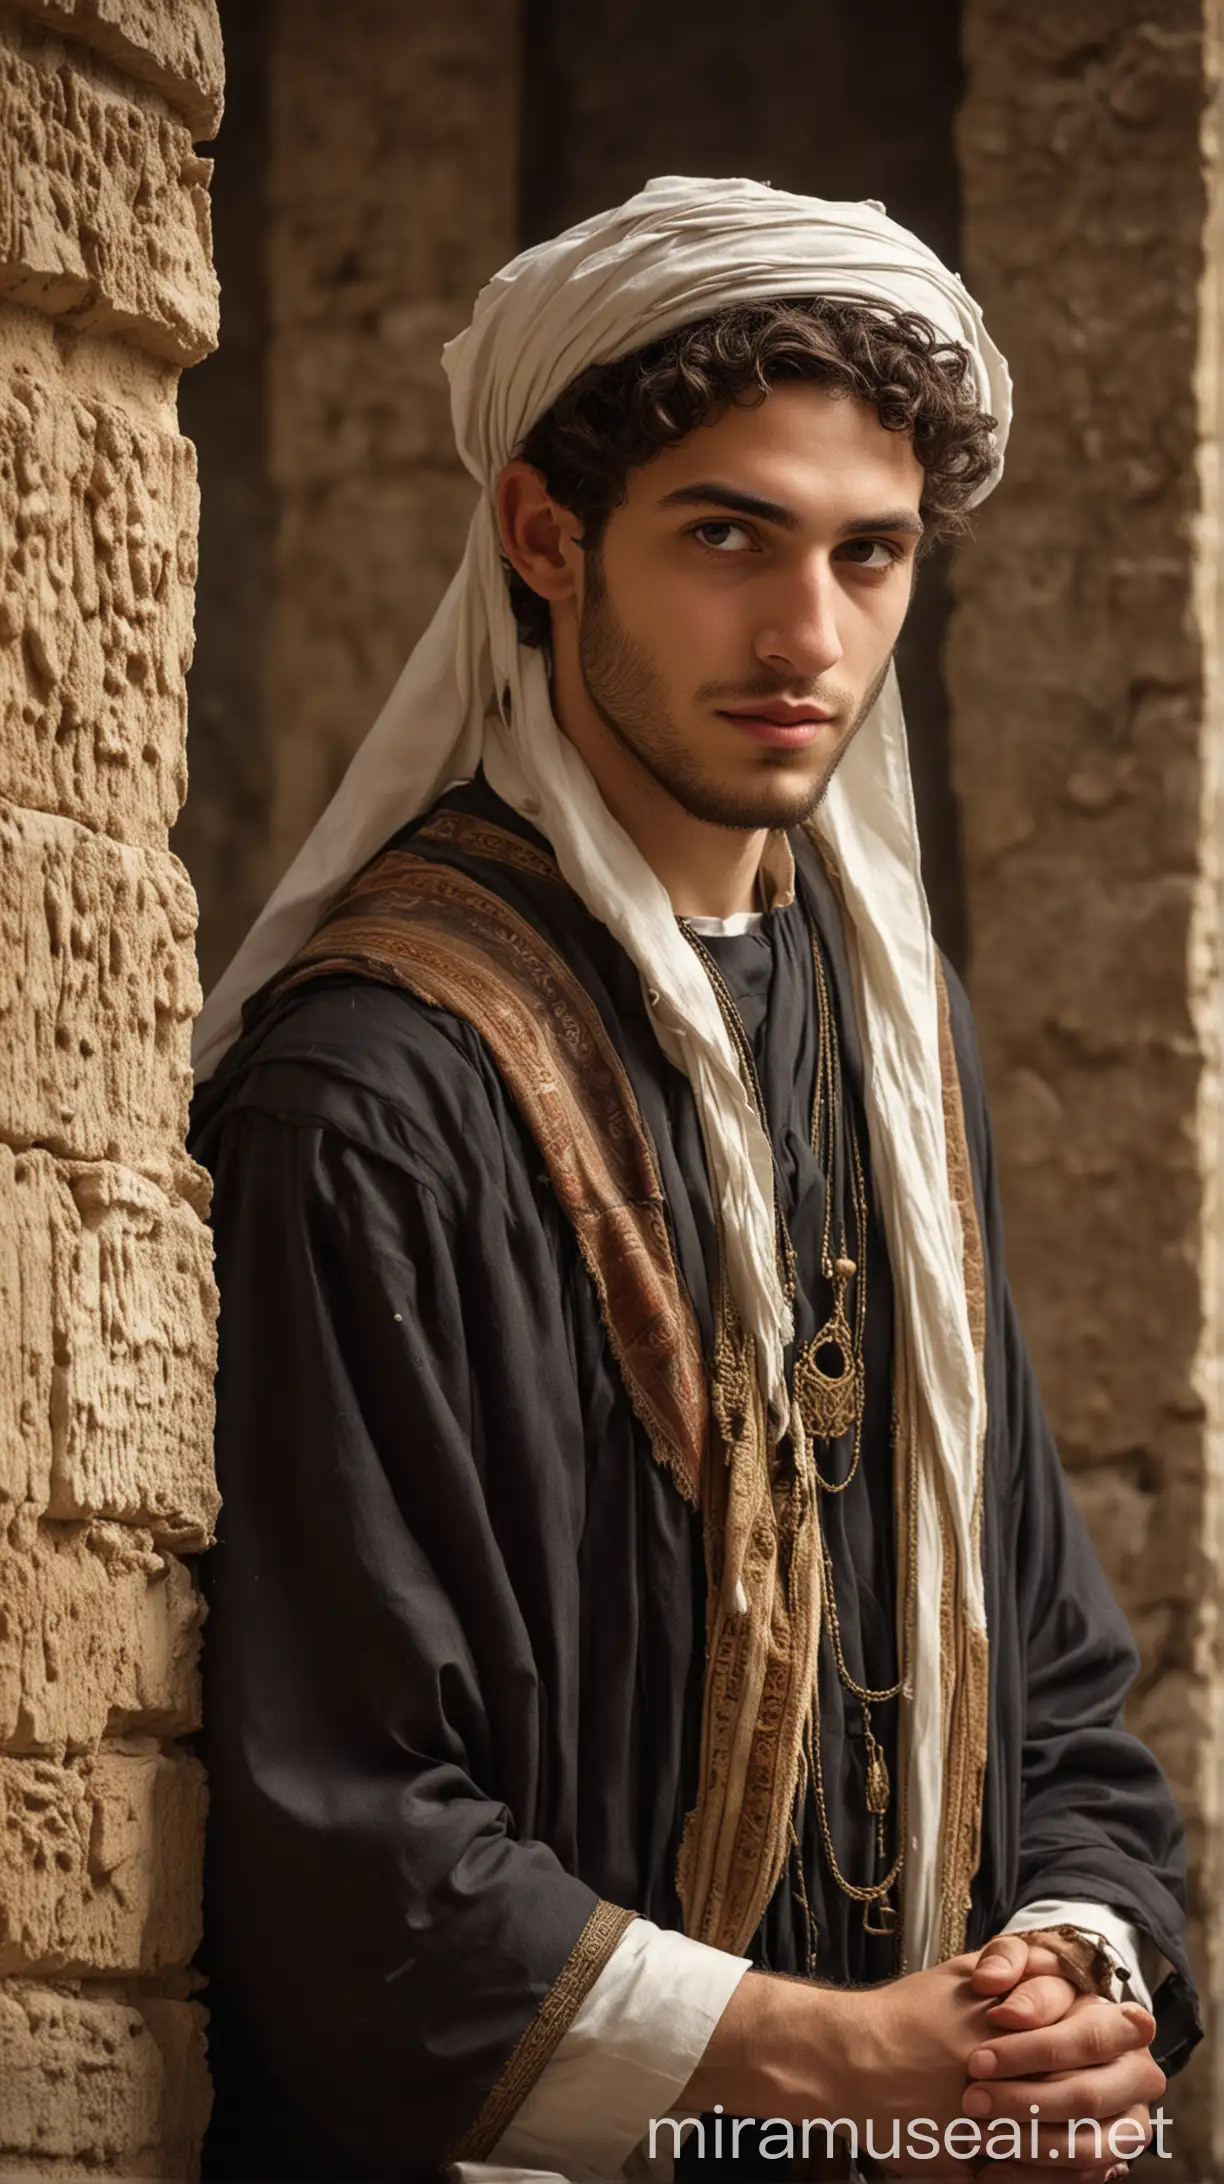 A young Jewish priest in ancient world 